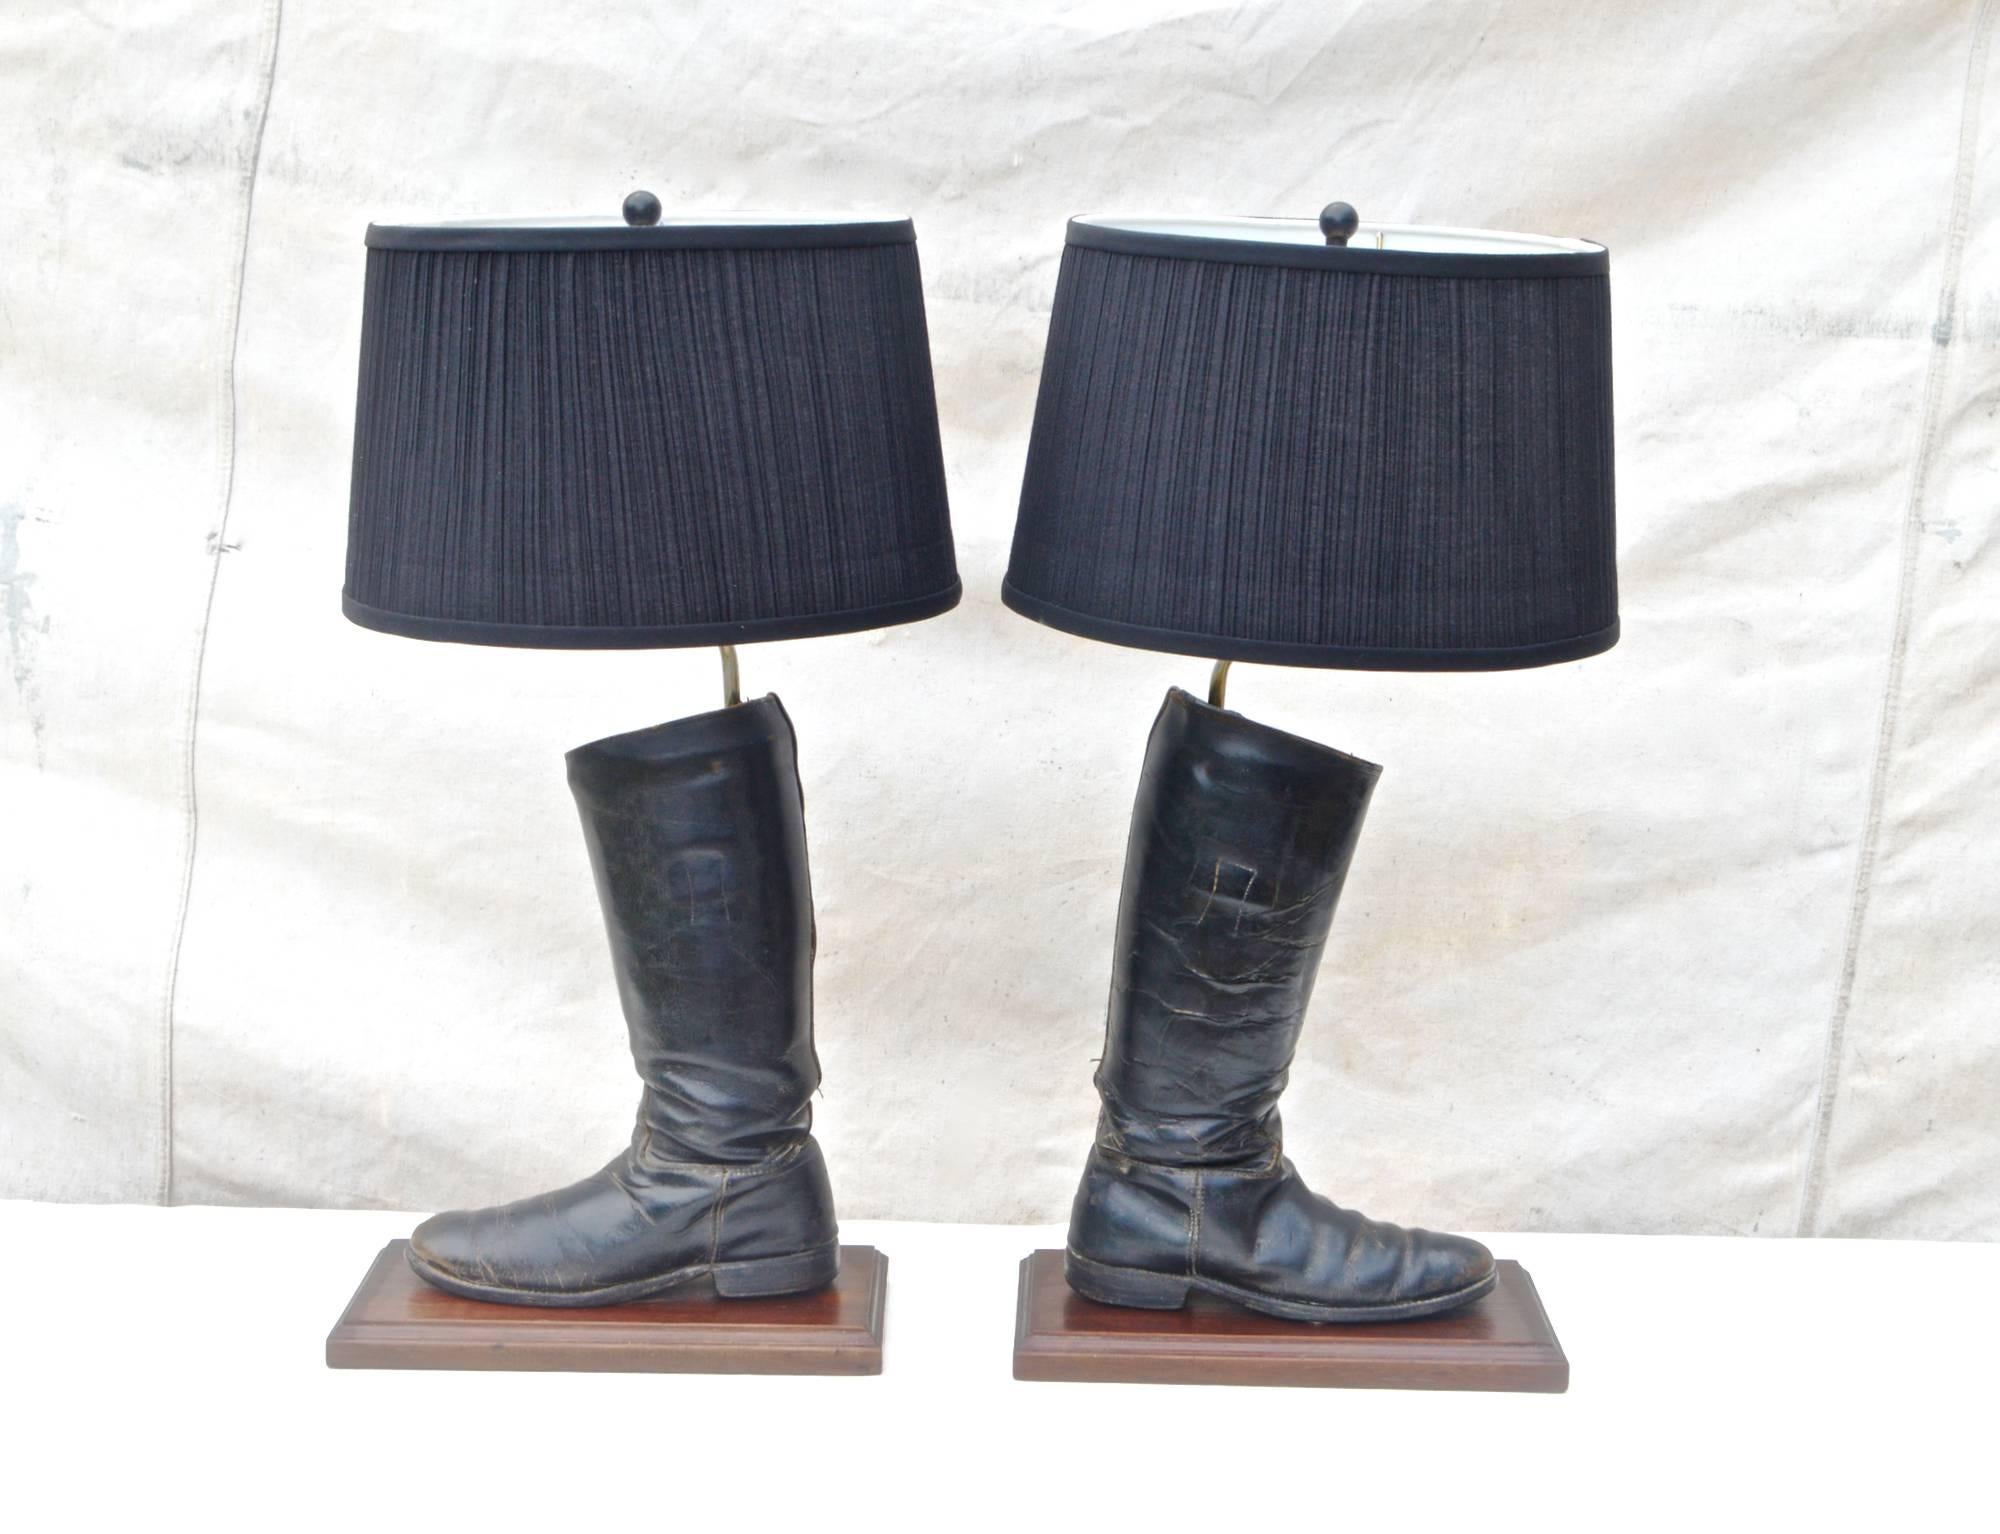 A finely made pair of English leather riding boots mounted as lamps. Well worn with scuffs , scrapes and natural patina, they sit atop solid oak bases which have long been varnished many times over giving them a natural lustre and gentle shine. Both